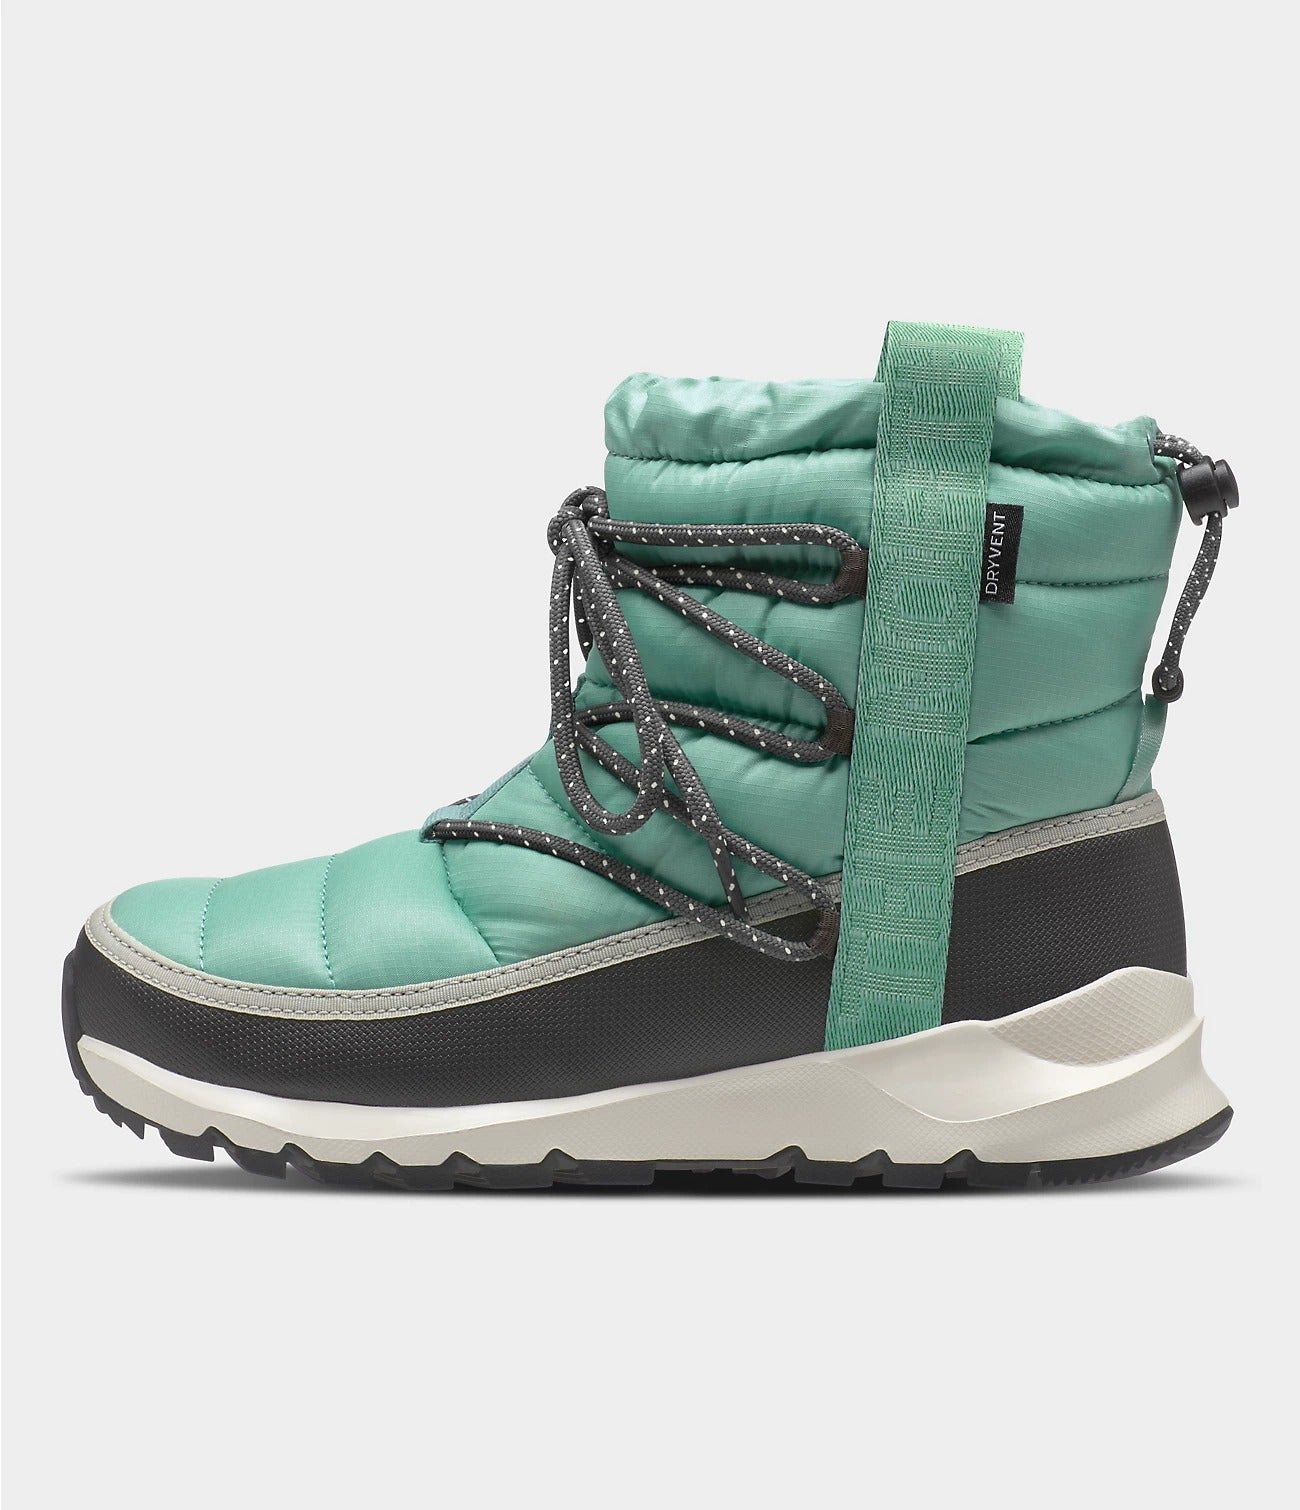 the boots in teal and grey